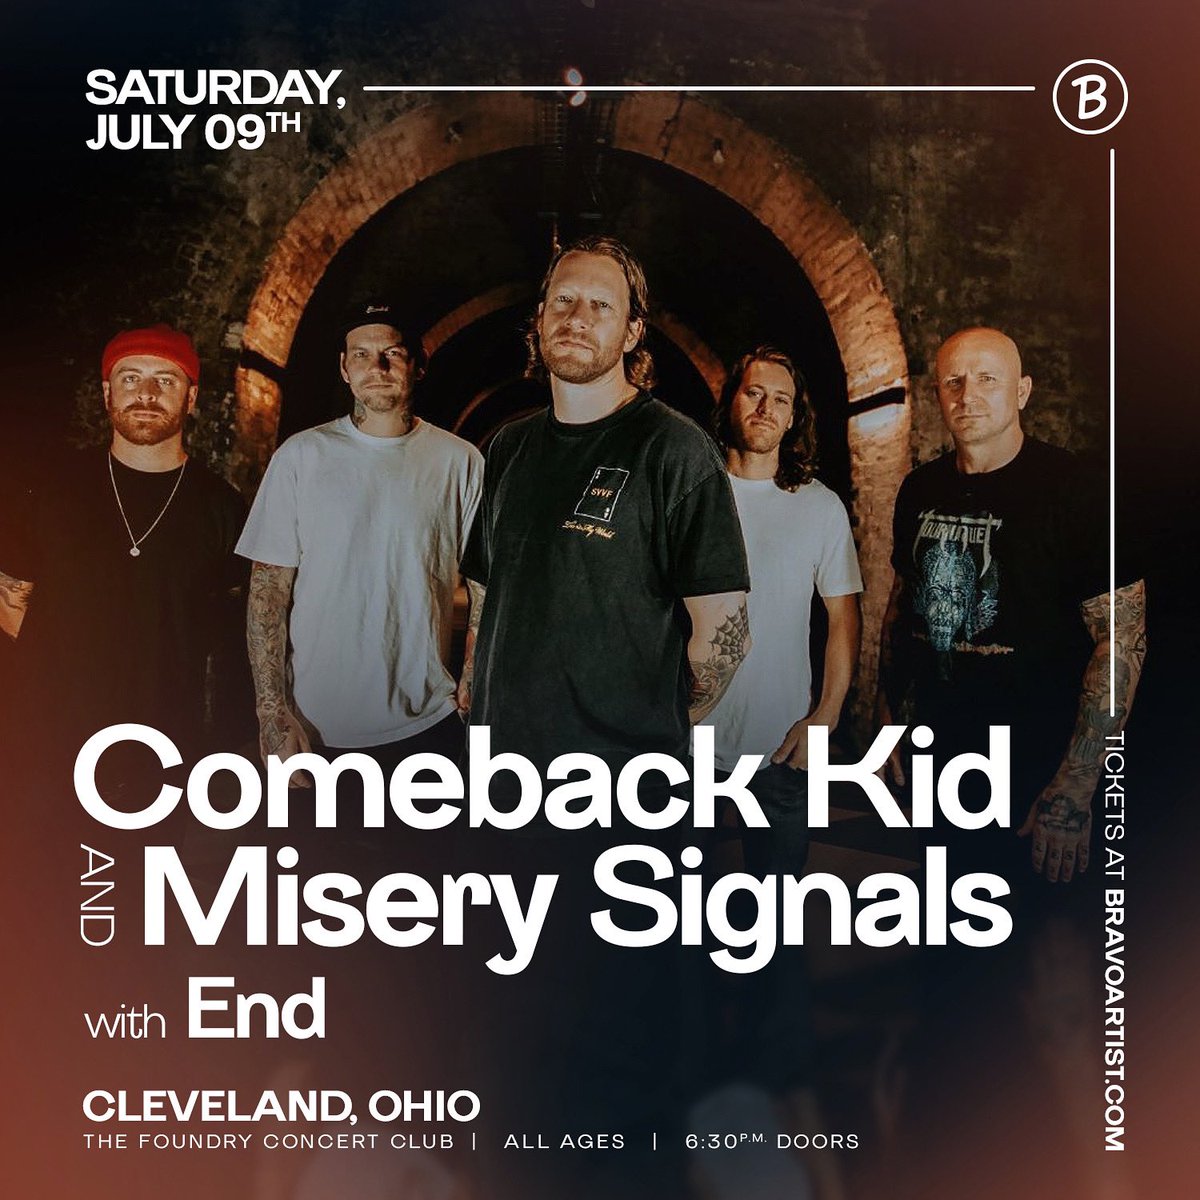 🔥NEW SHOW 🔥That’s right - Comeback Kid is about to absolutely rock Cleveland with Misery Signals and END this summer! Stoked for this! 🎟Tickets on sale this Friday - don’t miss this one!